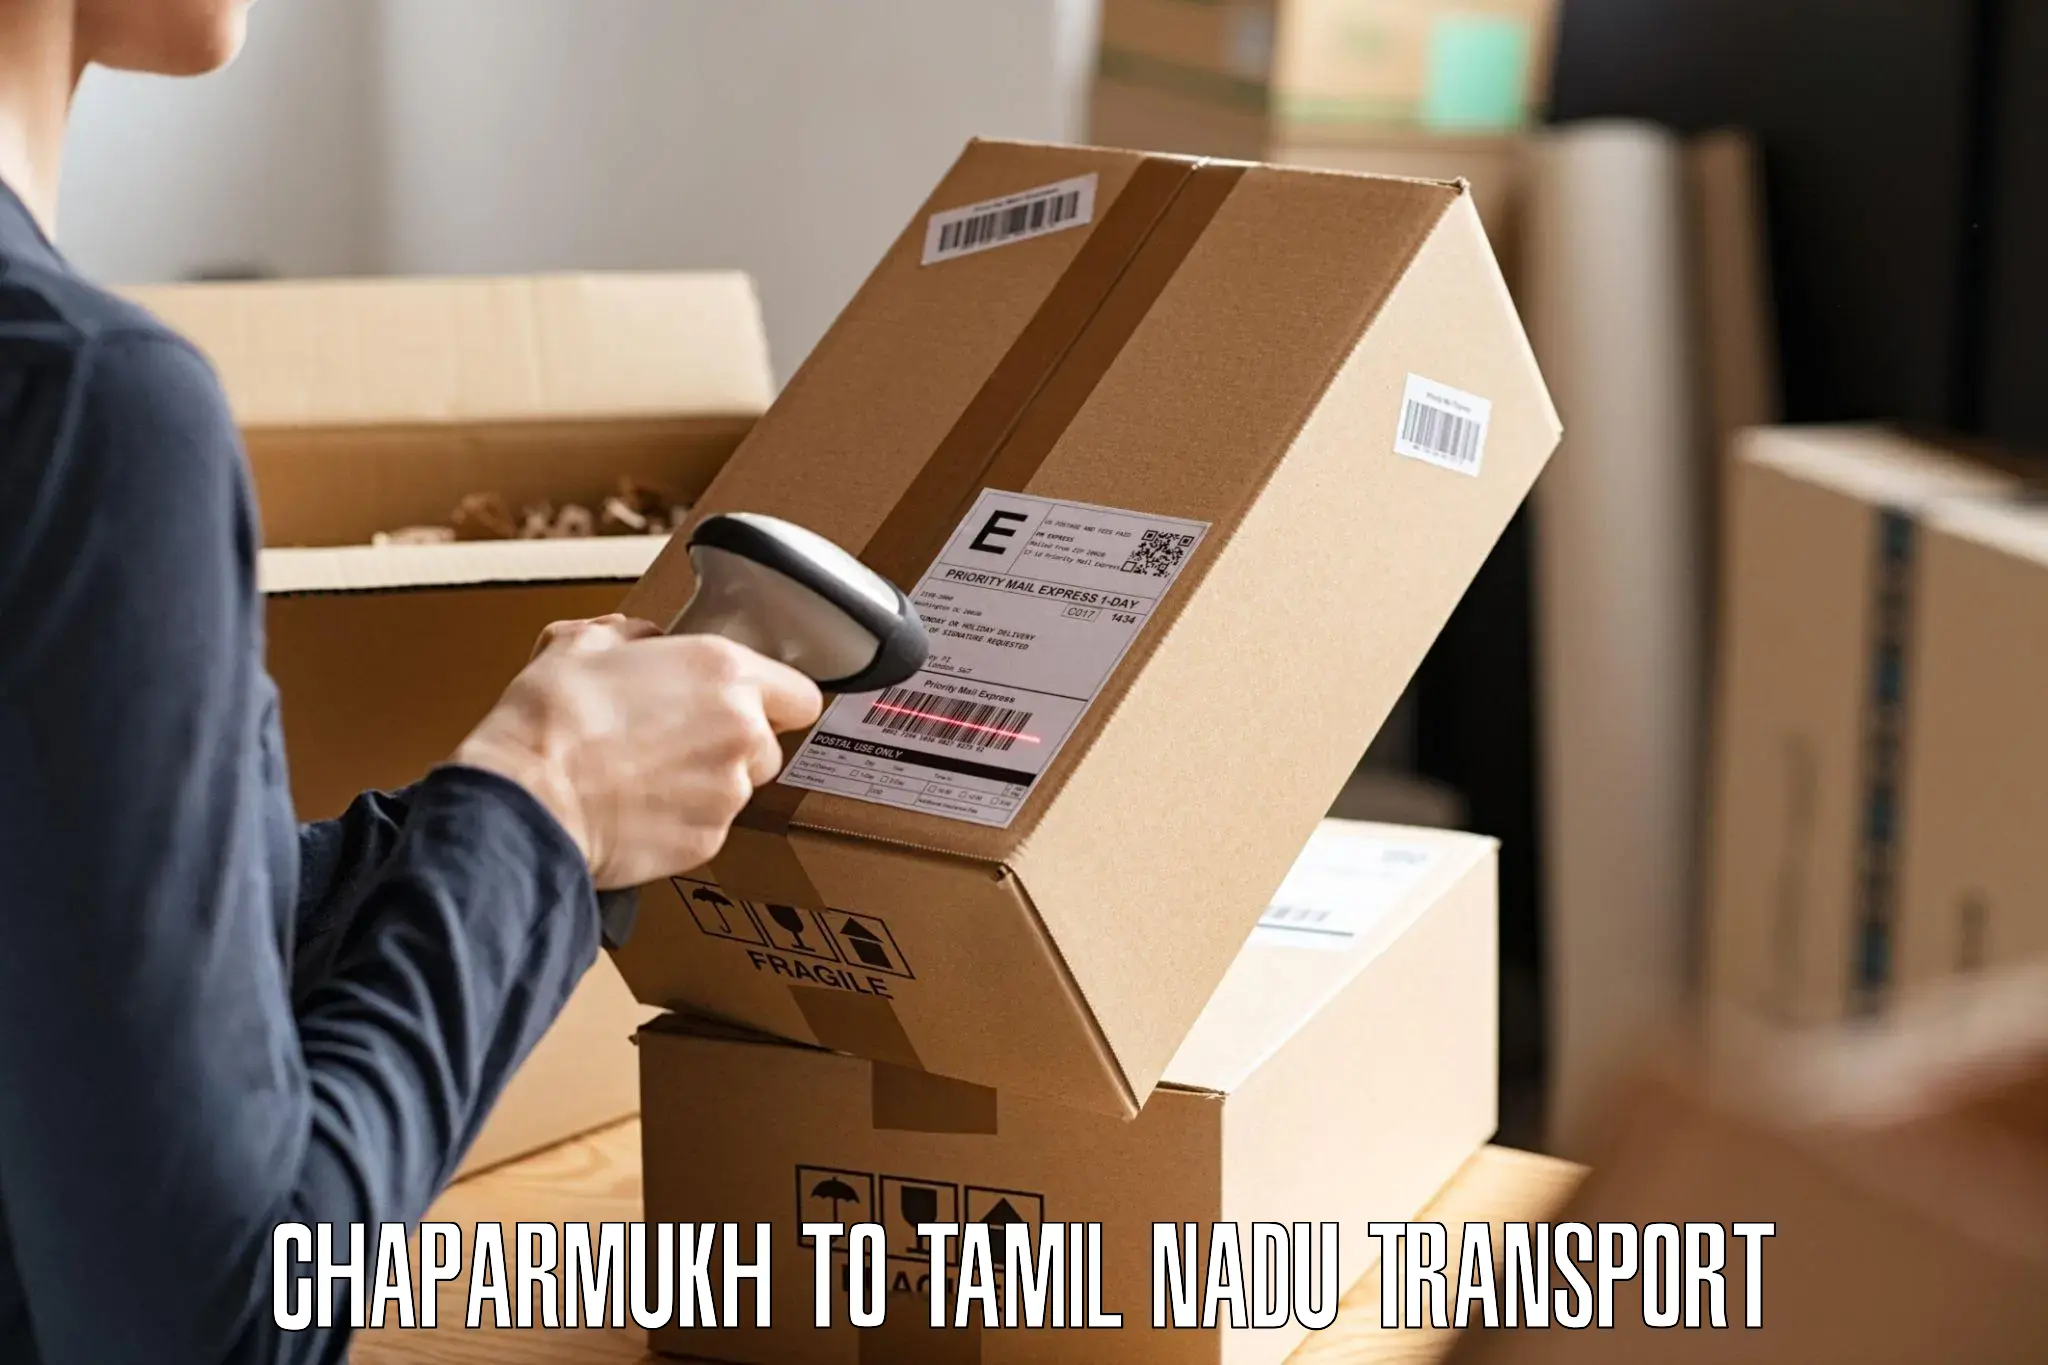 Container transportation services Chaparmukh to Tenkasi